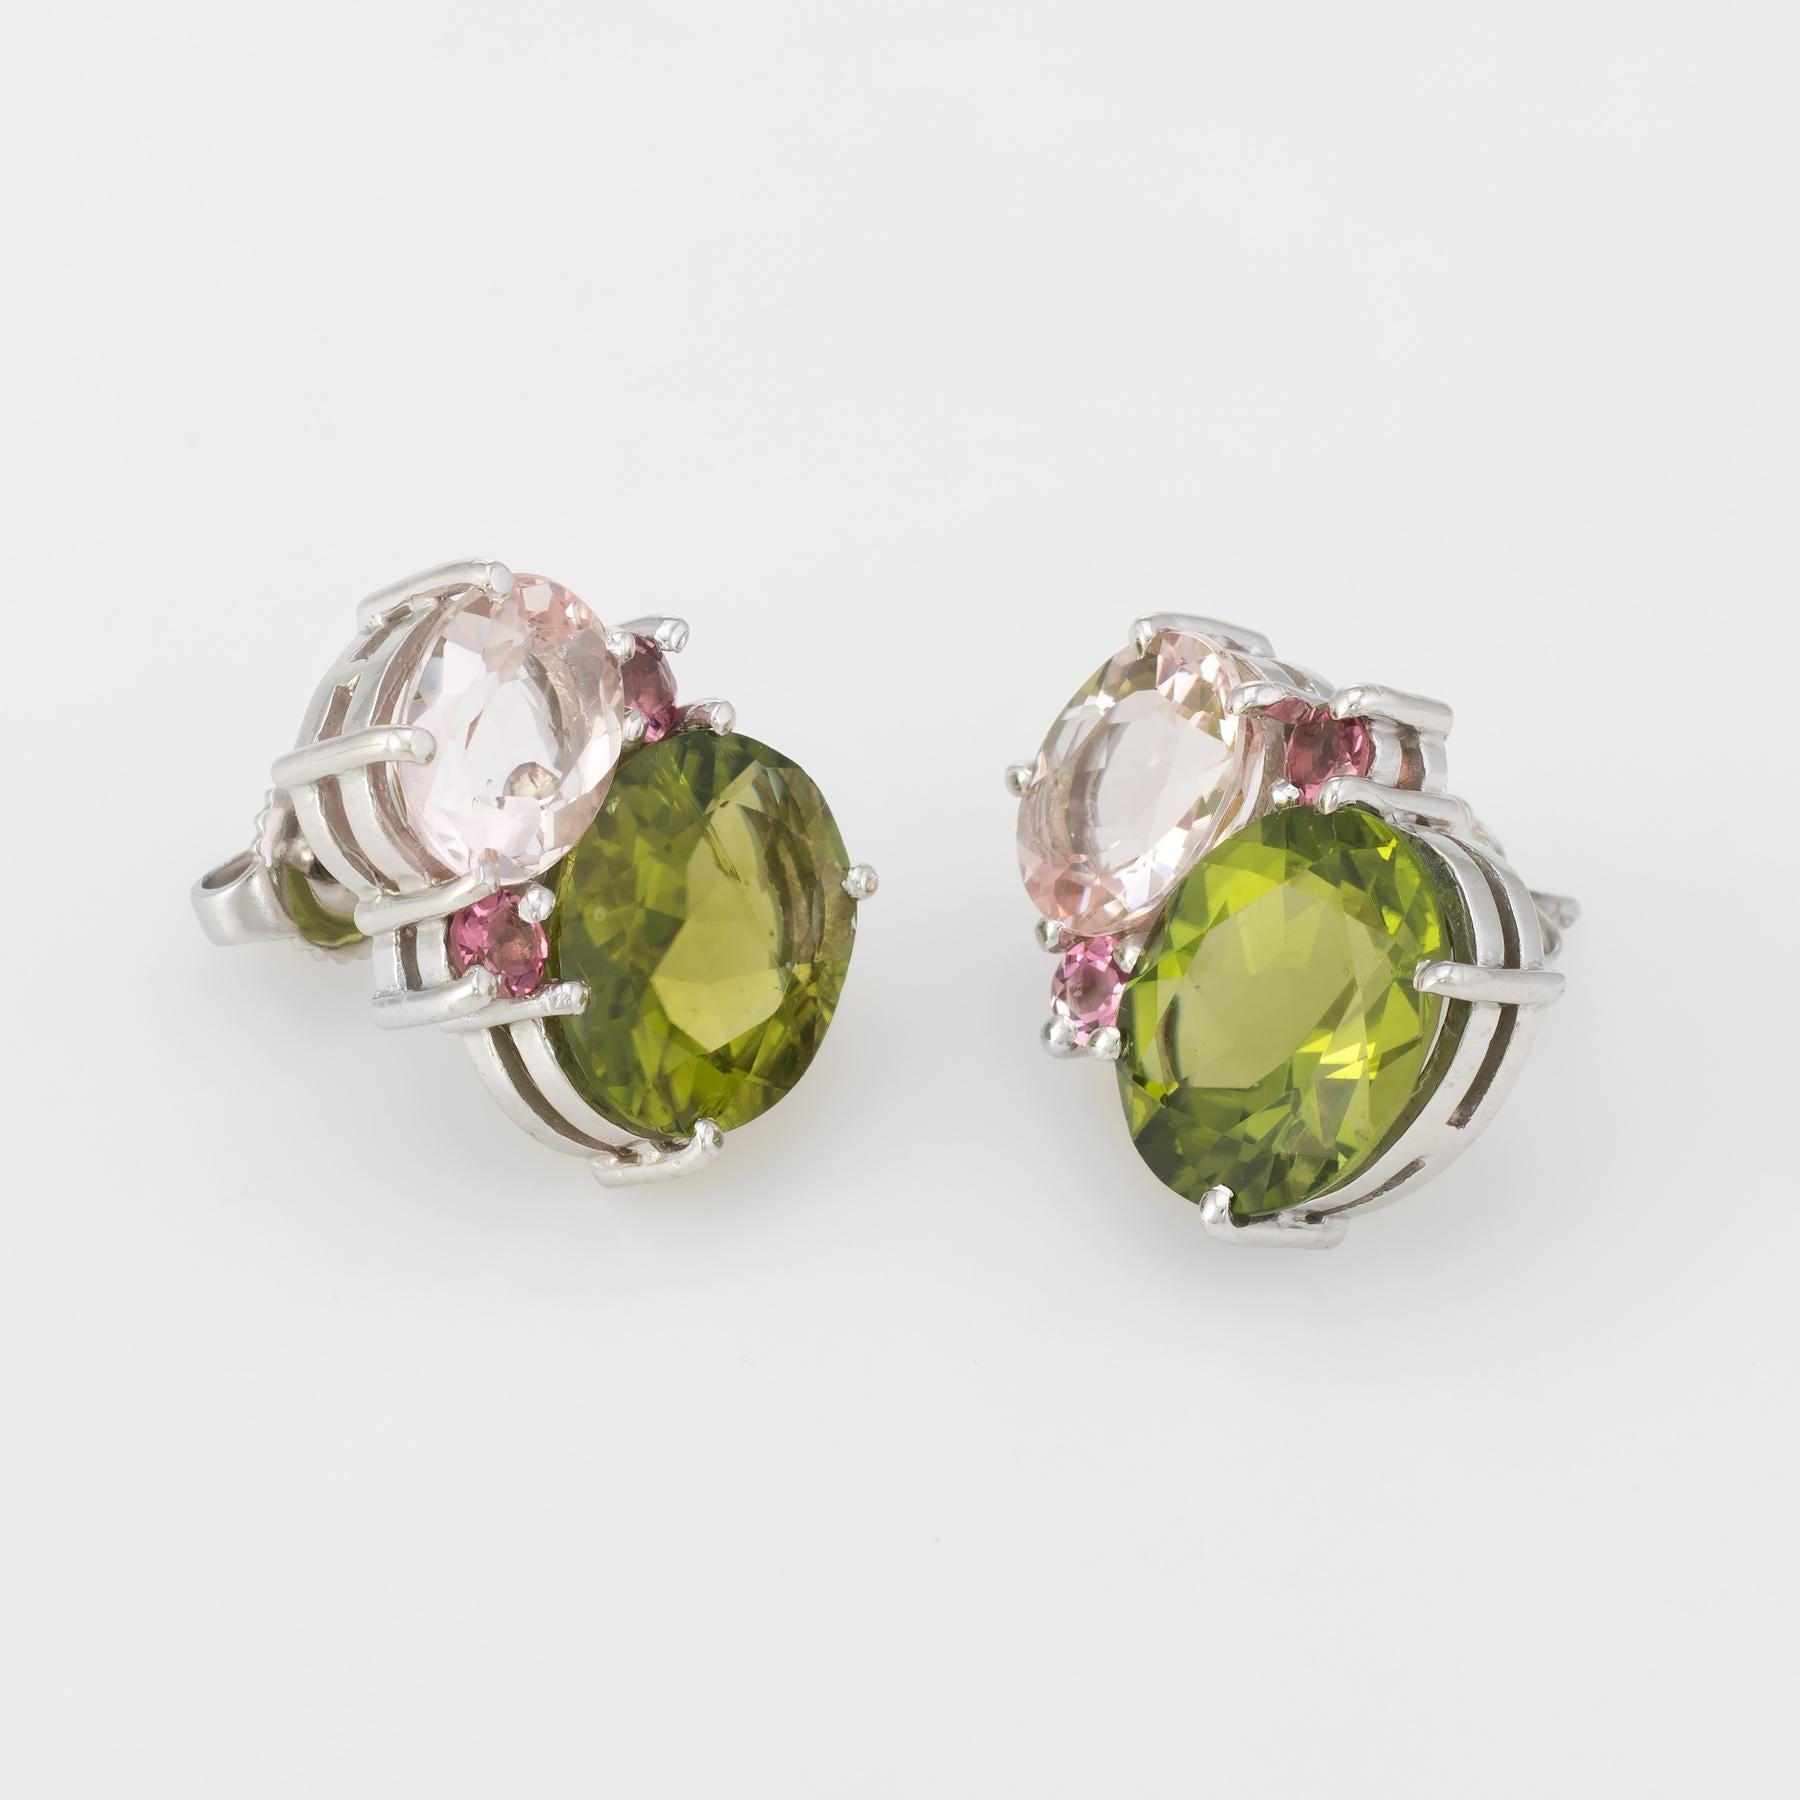 Finely detailed pair of estate earrings, crafted in 18k white gold.  Pre Owned

Peridot measures 12mm x 10mm (estimated at 4 carats each - 8 carats total estimated weight), accented with pink tourmalines that measures 9mm x 7mm (estimated at 2.50